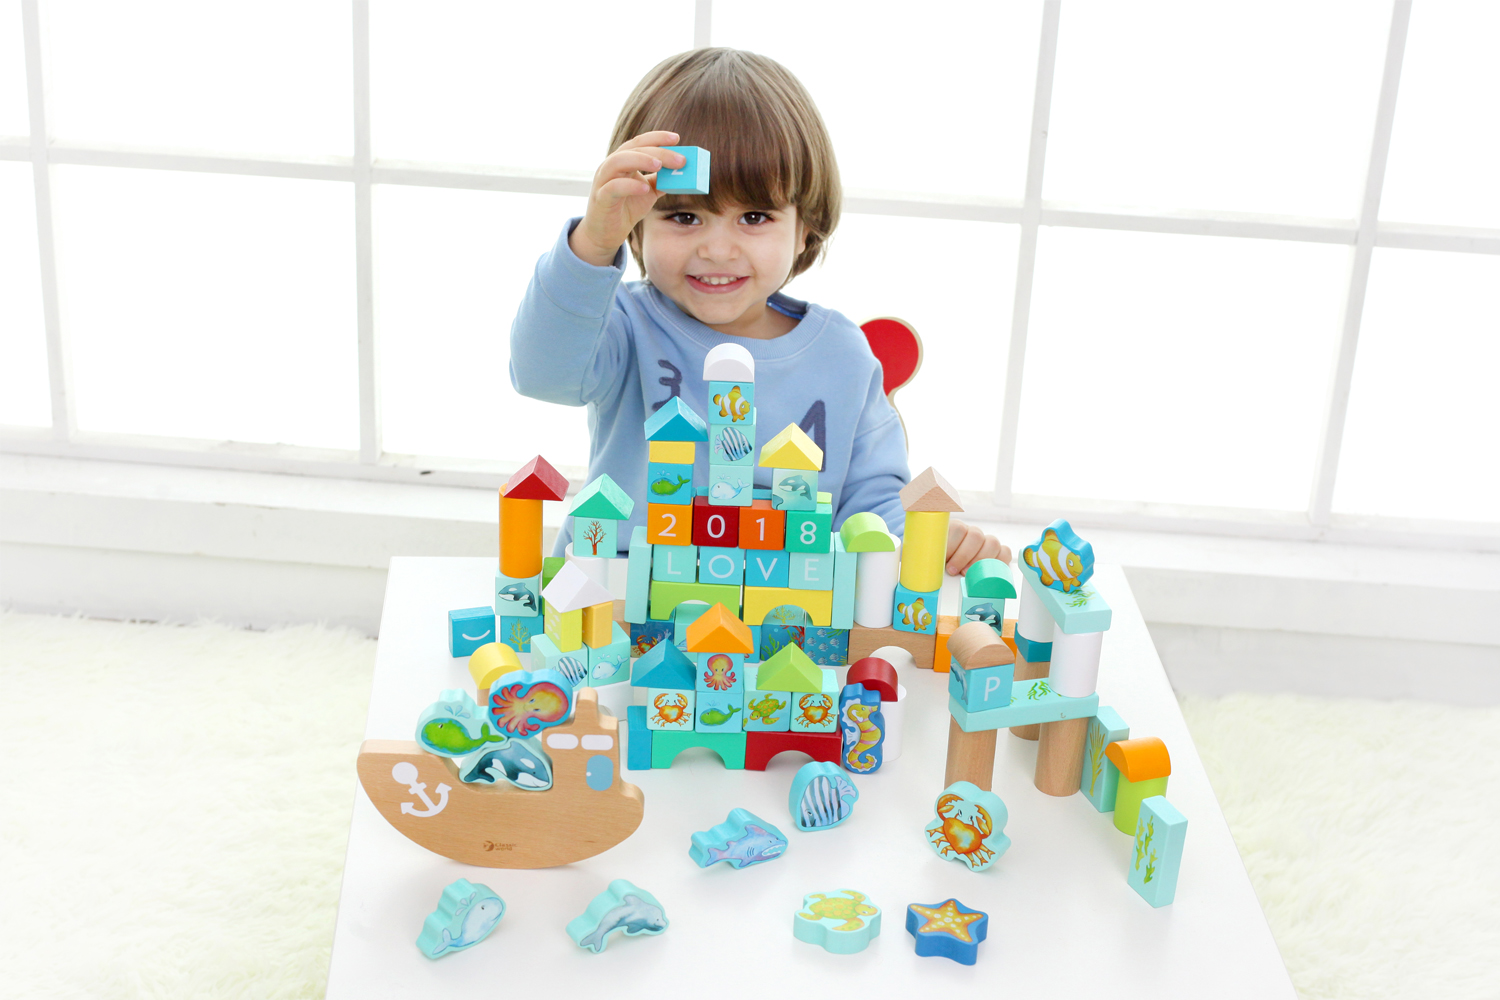 A Guide to Wooden Toys for Young Children by Age & Stage